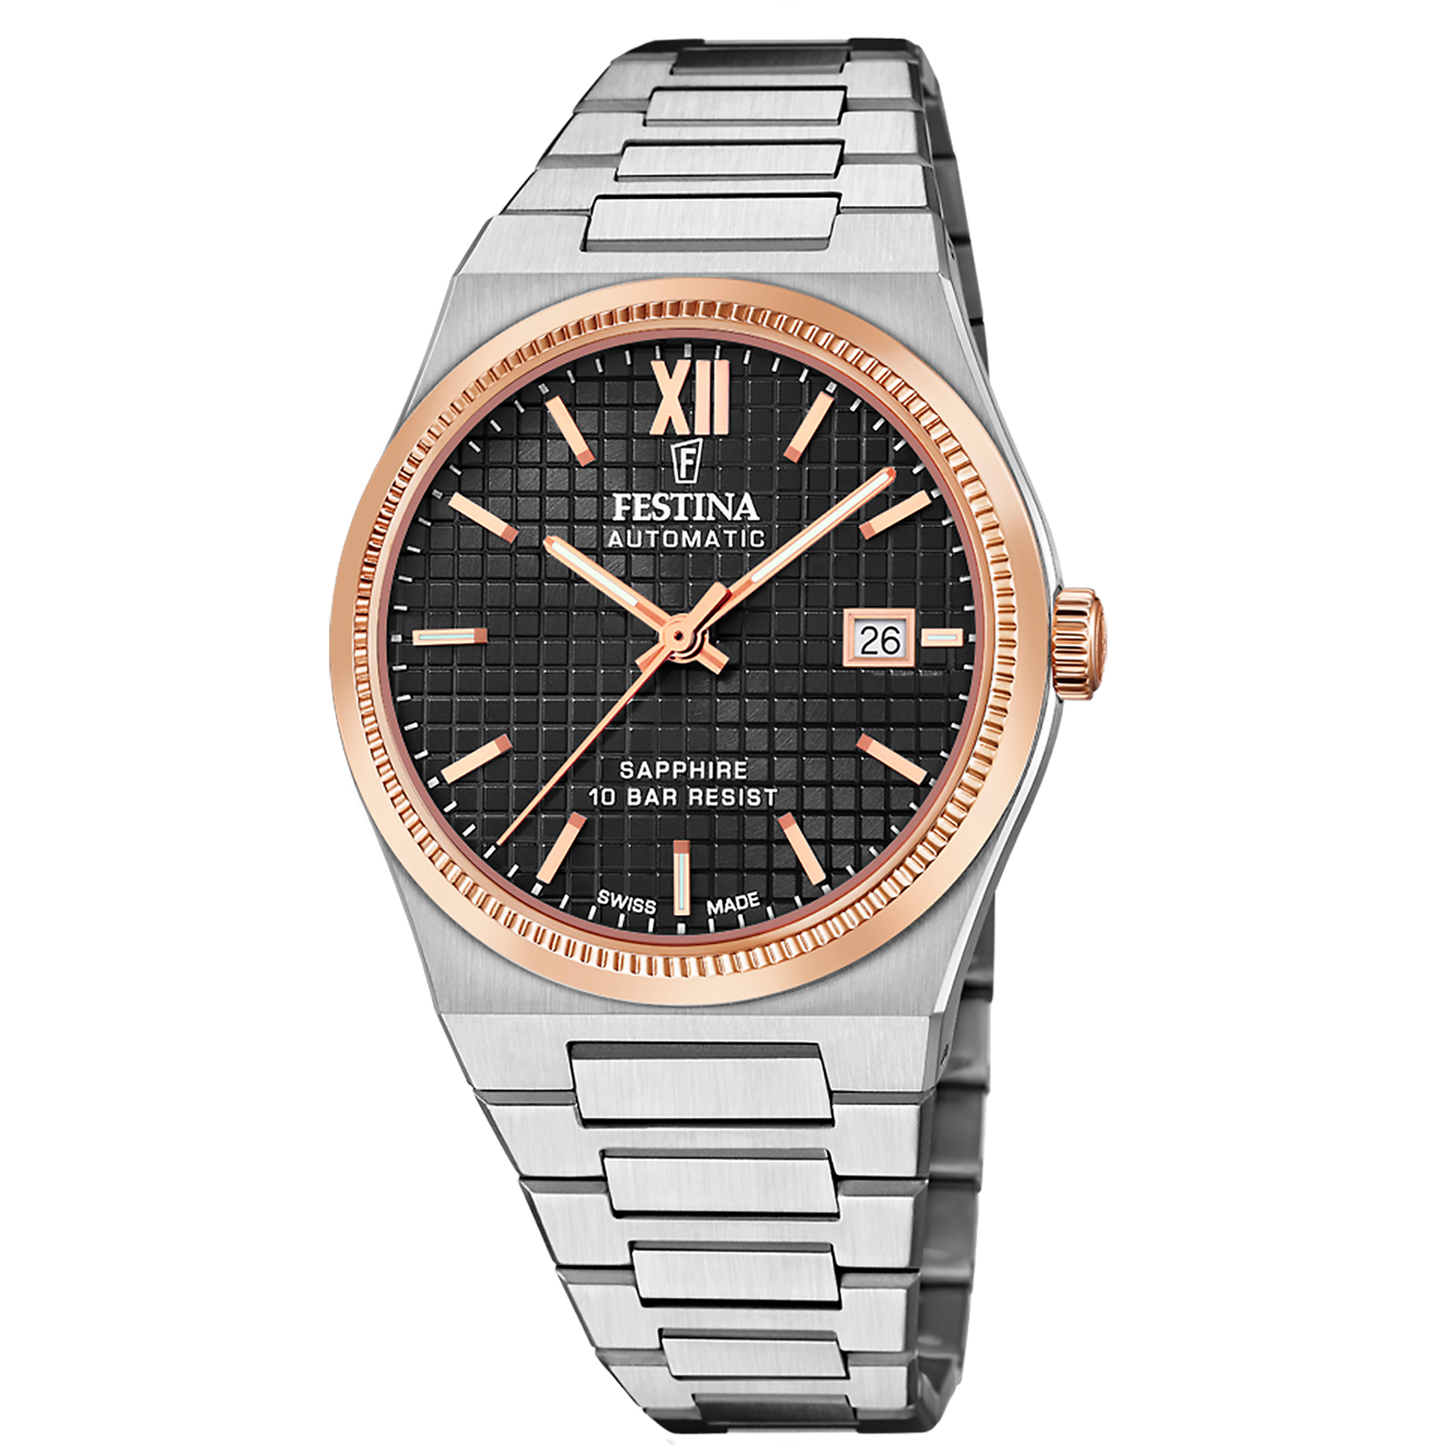 Festina Swiss Made F20030-3 - Analog - Strap Material Stainless Steel I Festina Watches USA